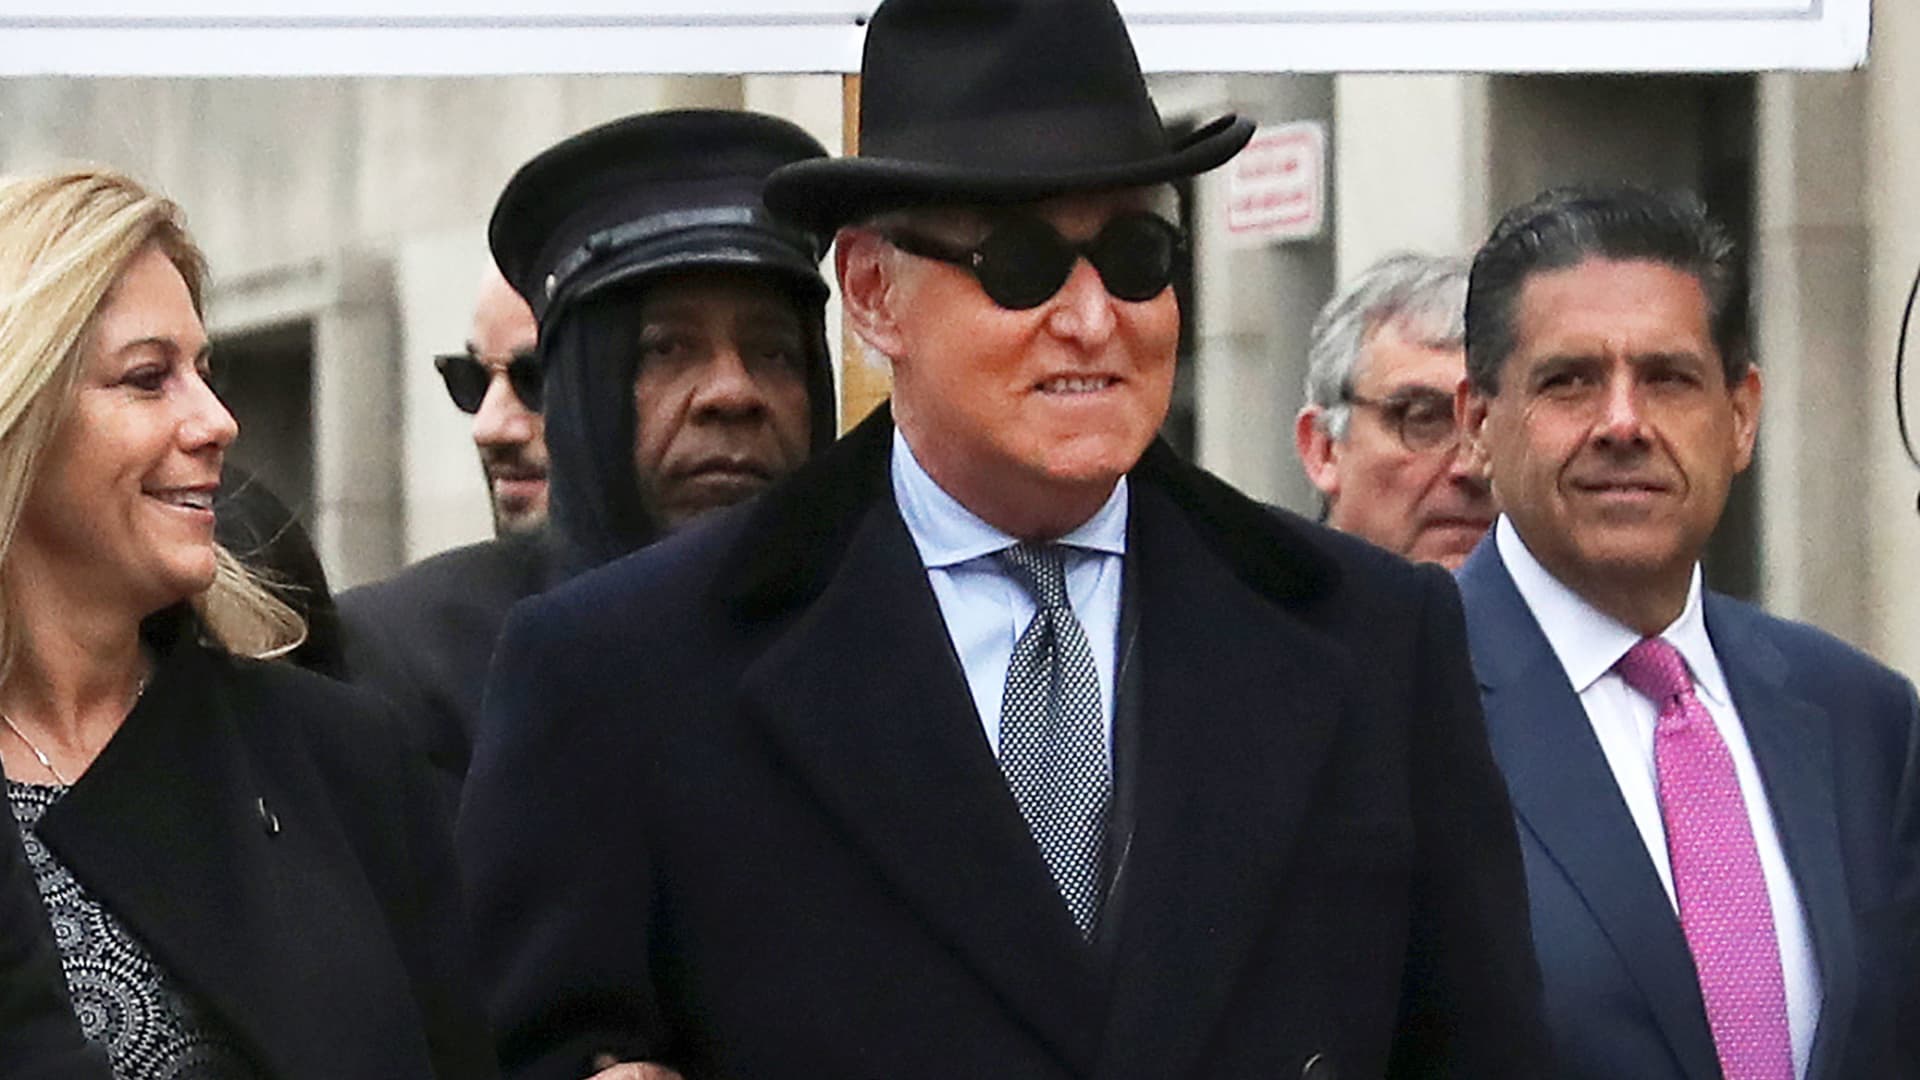 Roger Stone, former campaign adviser to U.S. President Donald Trump, arrives at the federal courthouse where he is set to be sentenced, in Washington, U.S., February 20, 2020.